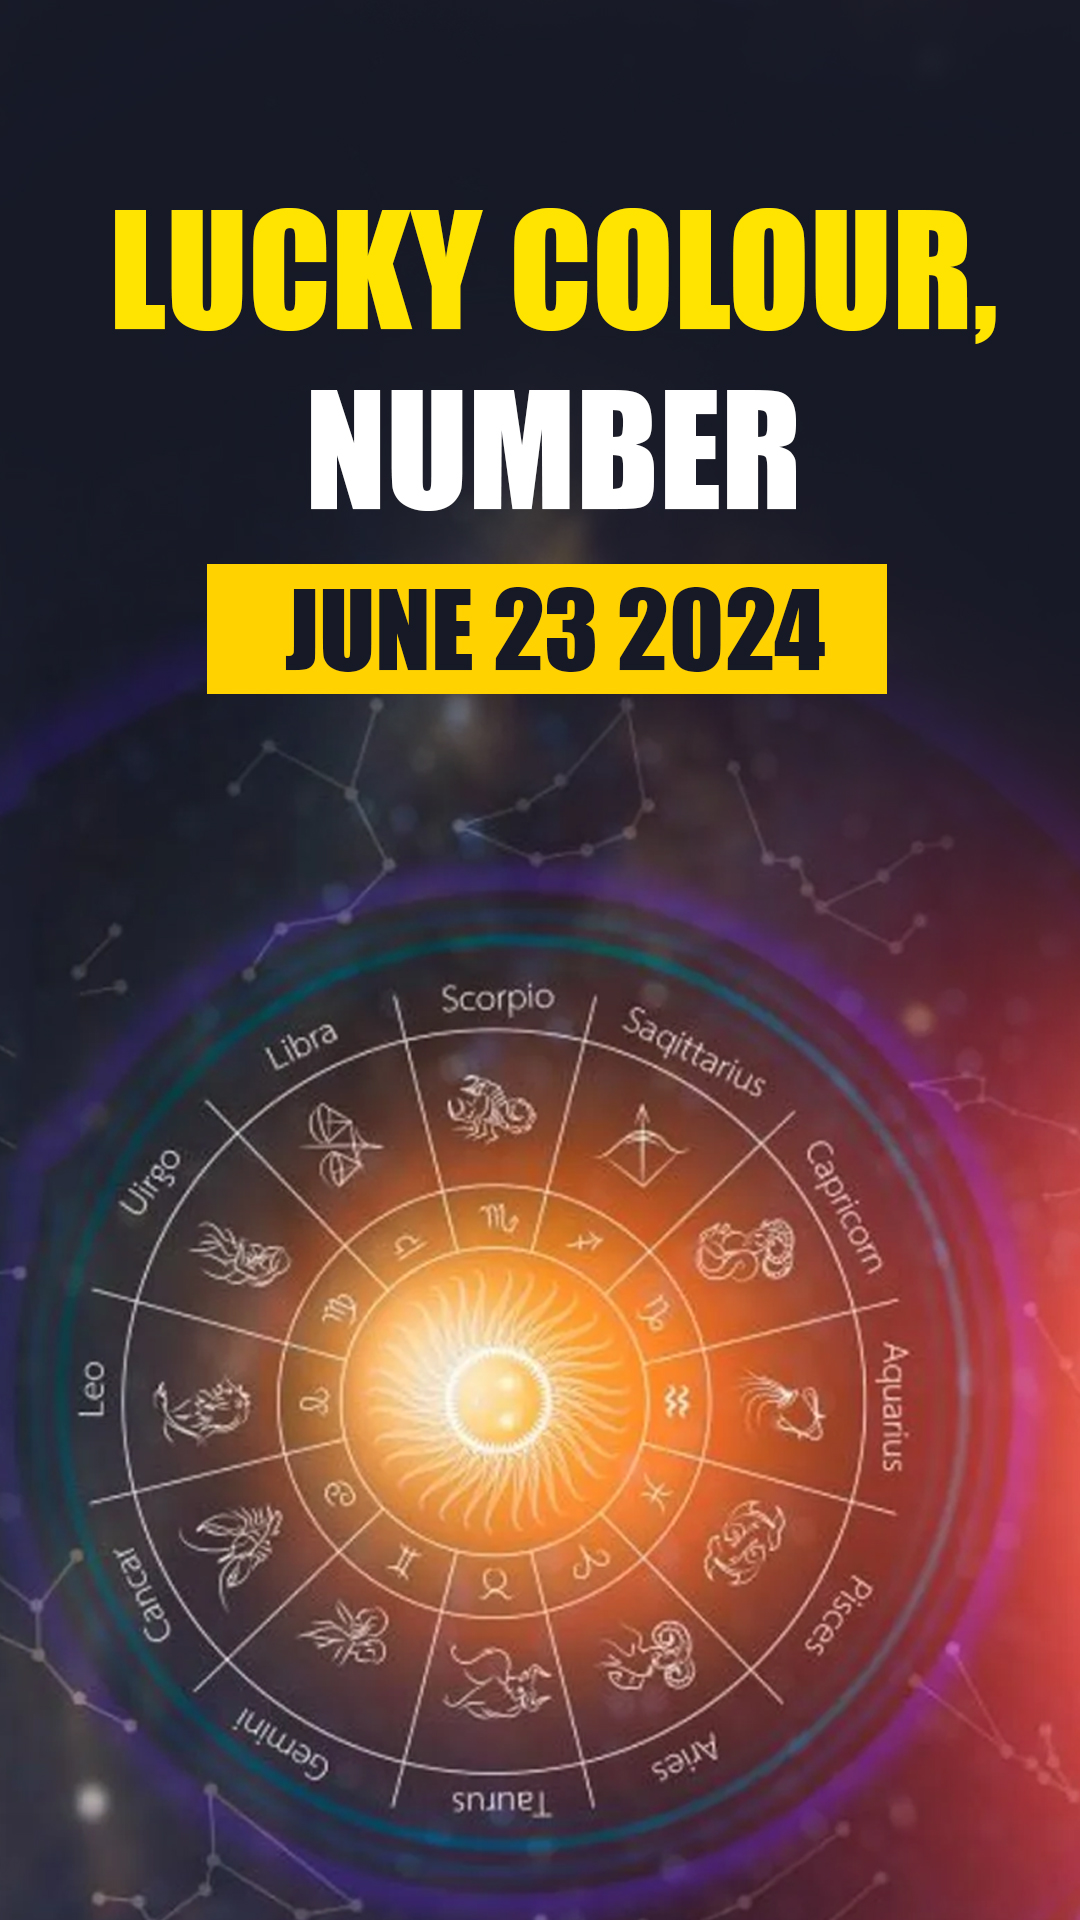 Know lucky colour, number of all zodiac signs in horoscope for June 23, 2024